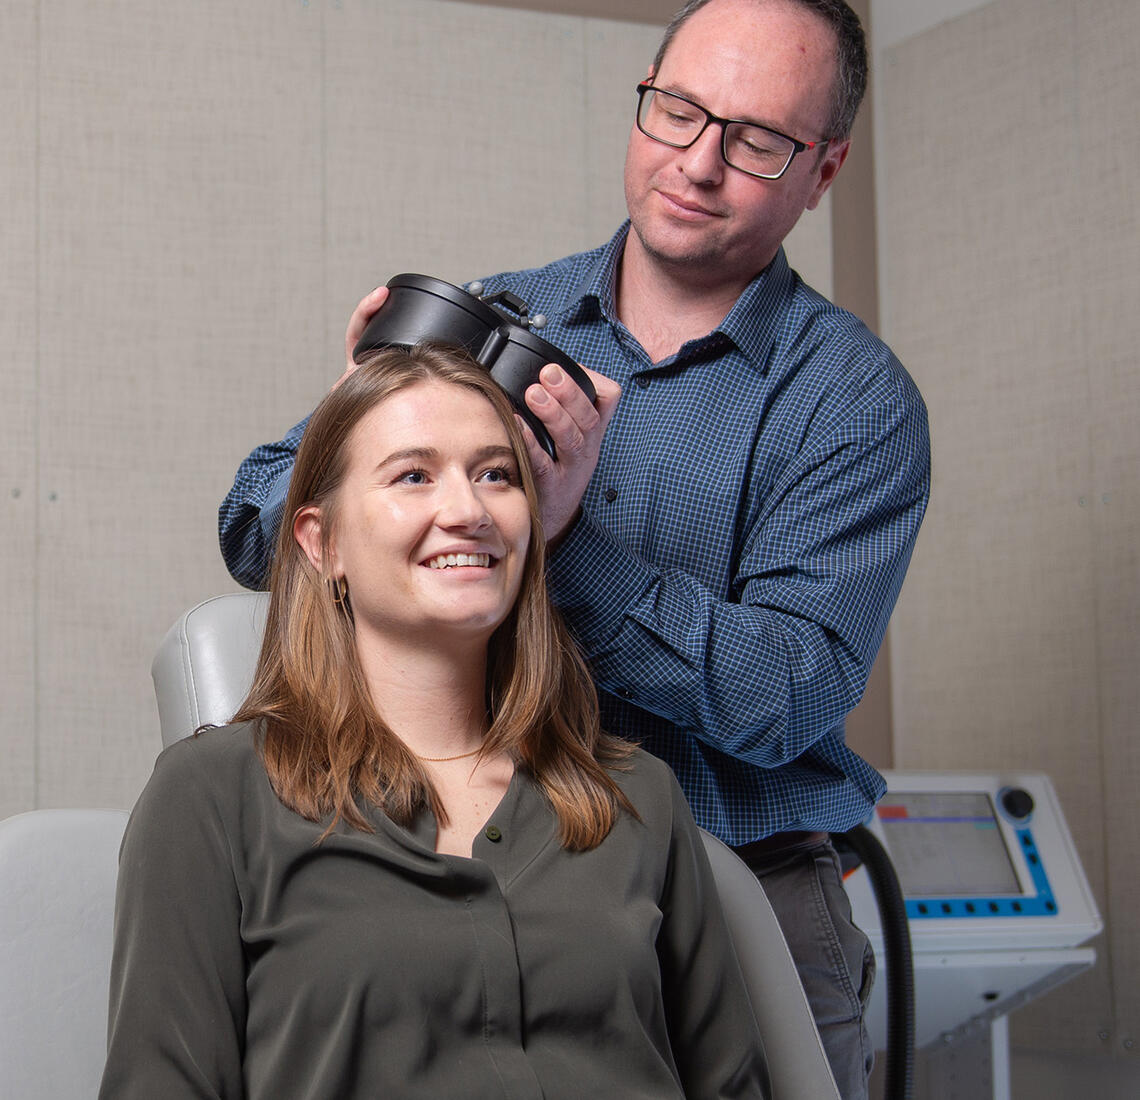 Dr. Alex McGirr demonstrates transcranial magnetic stimulation (TMS) on his graduate student, Jaeden Cole. McGirr is holding a small black device up against Jaeden's head.